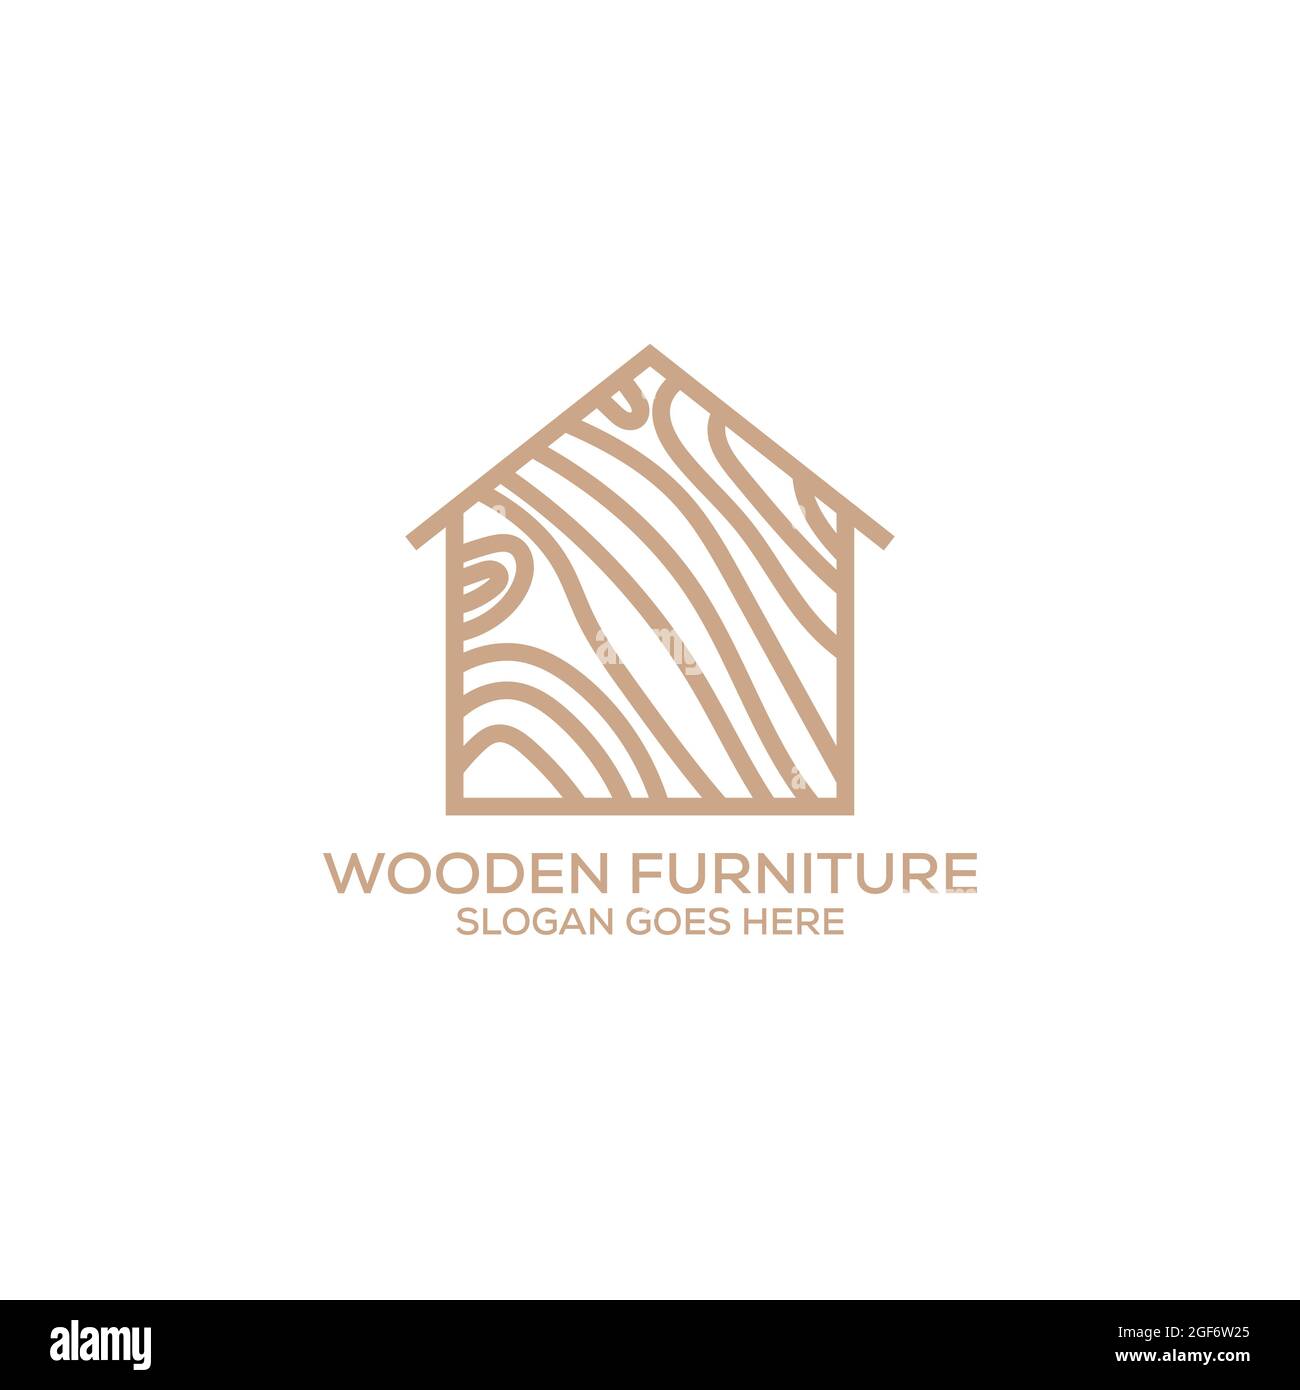 Wooden furniture logo design, can be used as interior designs, brand identity, company logo, icons, or others. Stock Vector